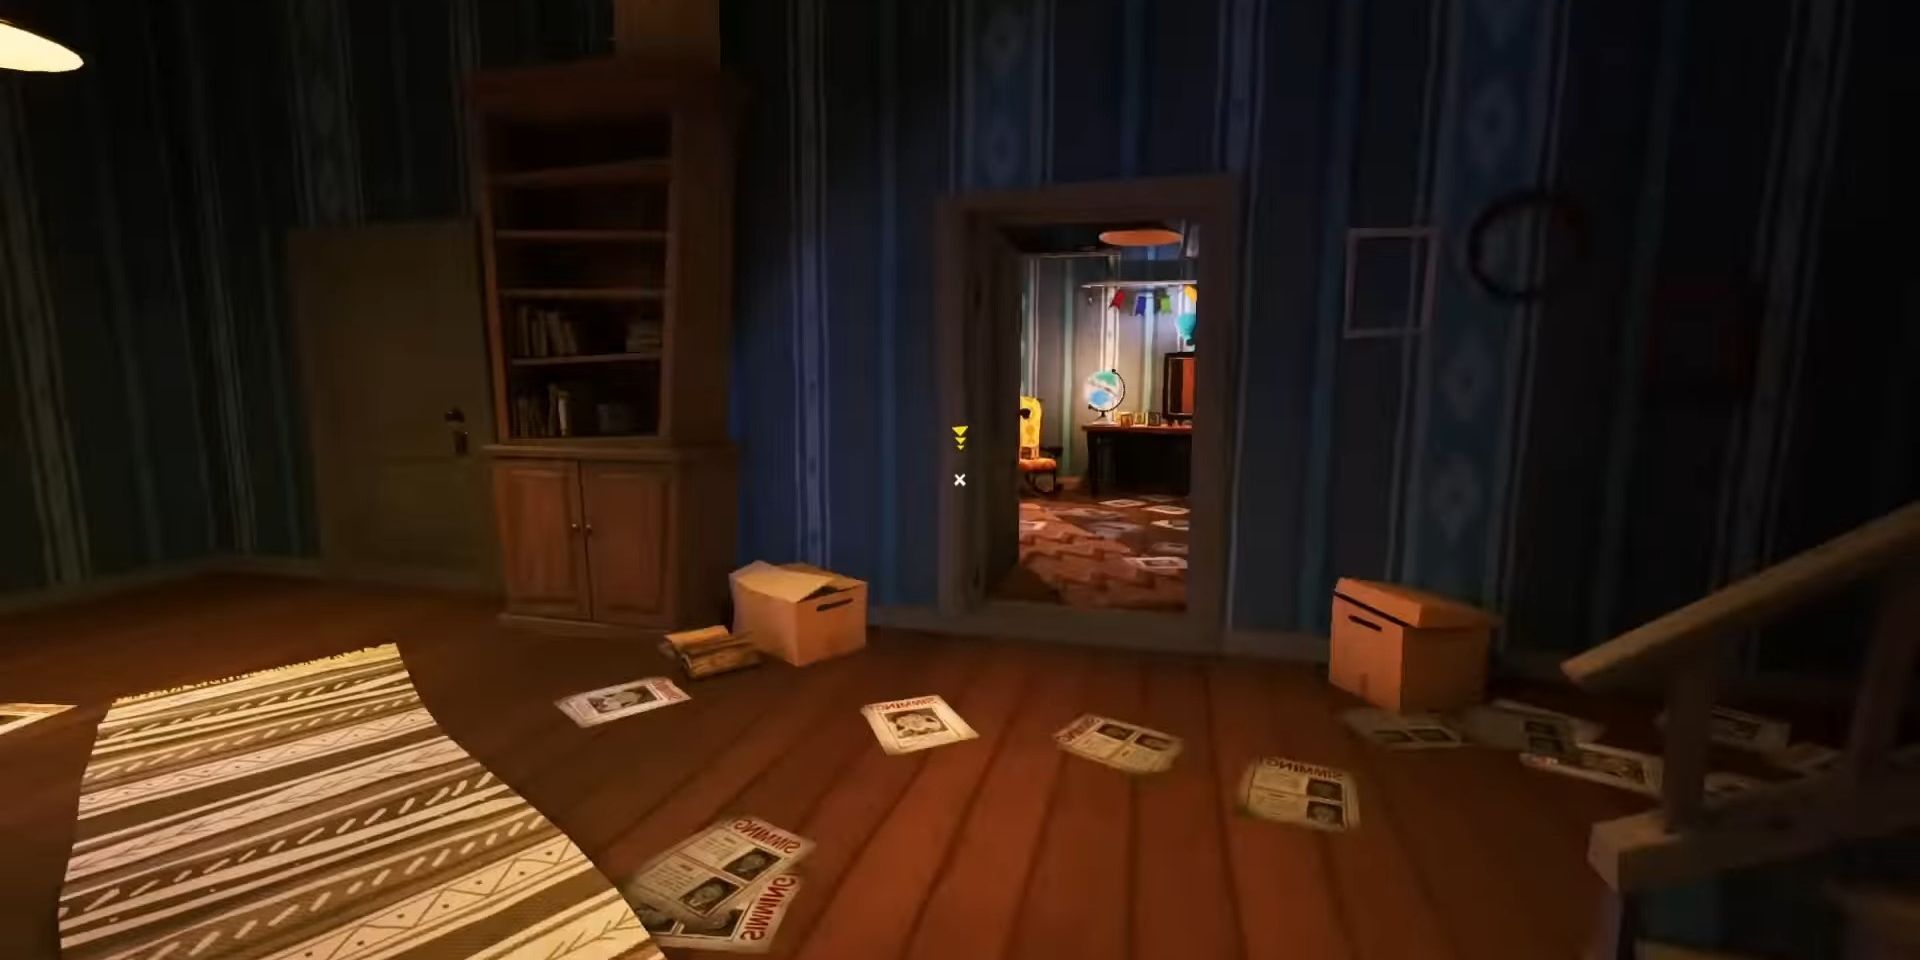 a screenshot of Hello Neighbor 2 in which the player is running through a house